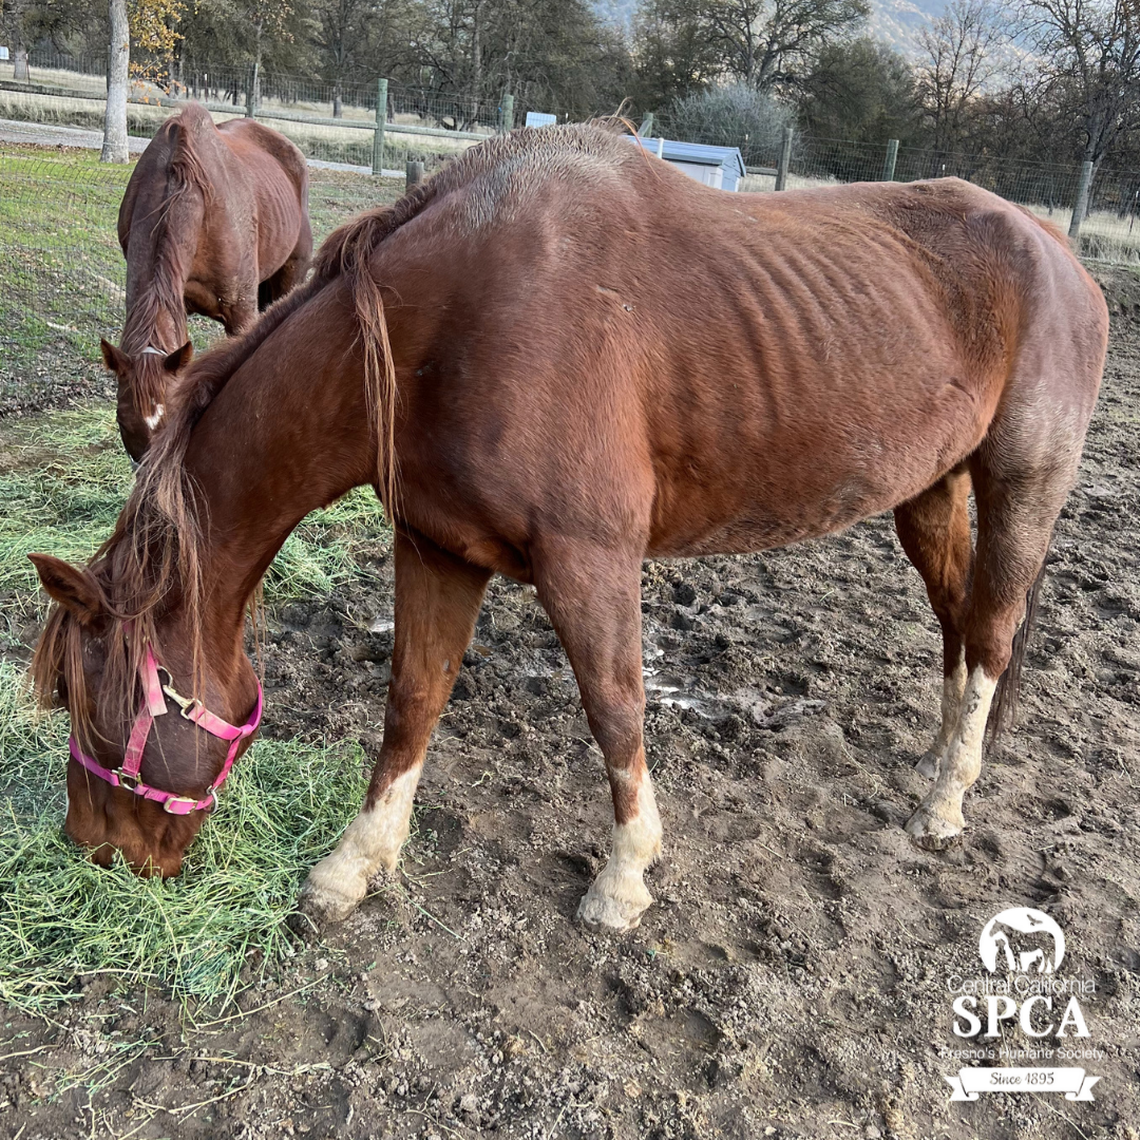 A neglected horse, one of ten seized by Central California SPCA officials, was taken to a secure facility where it is being cared for by the agency.